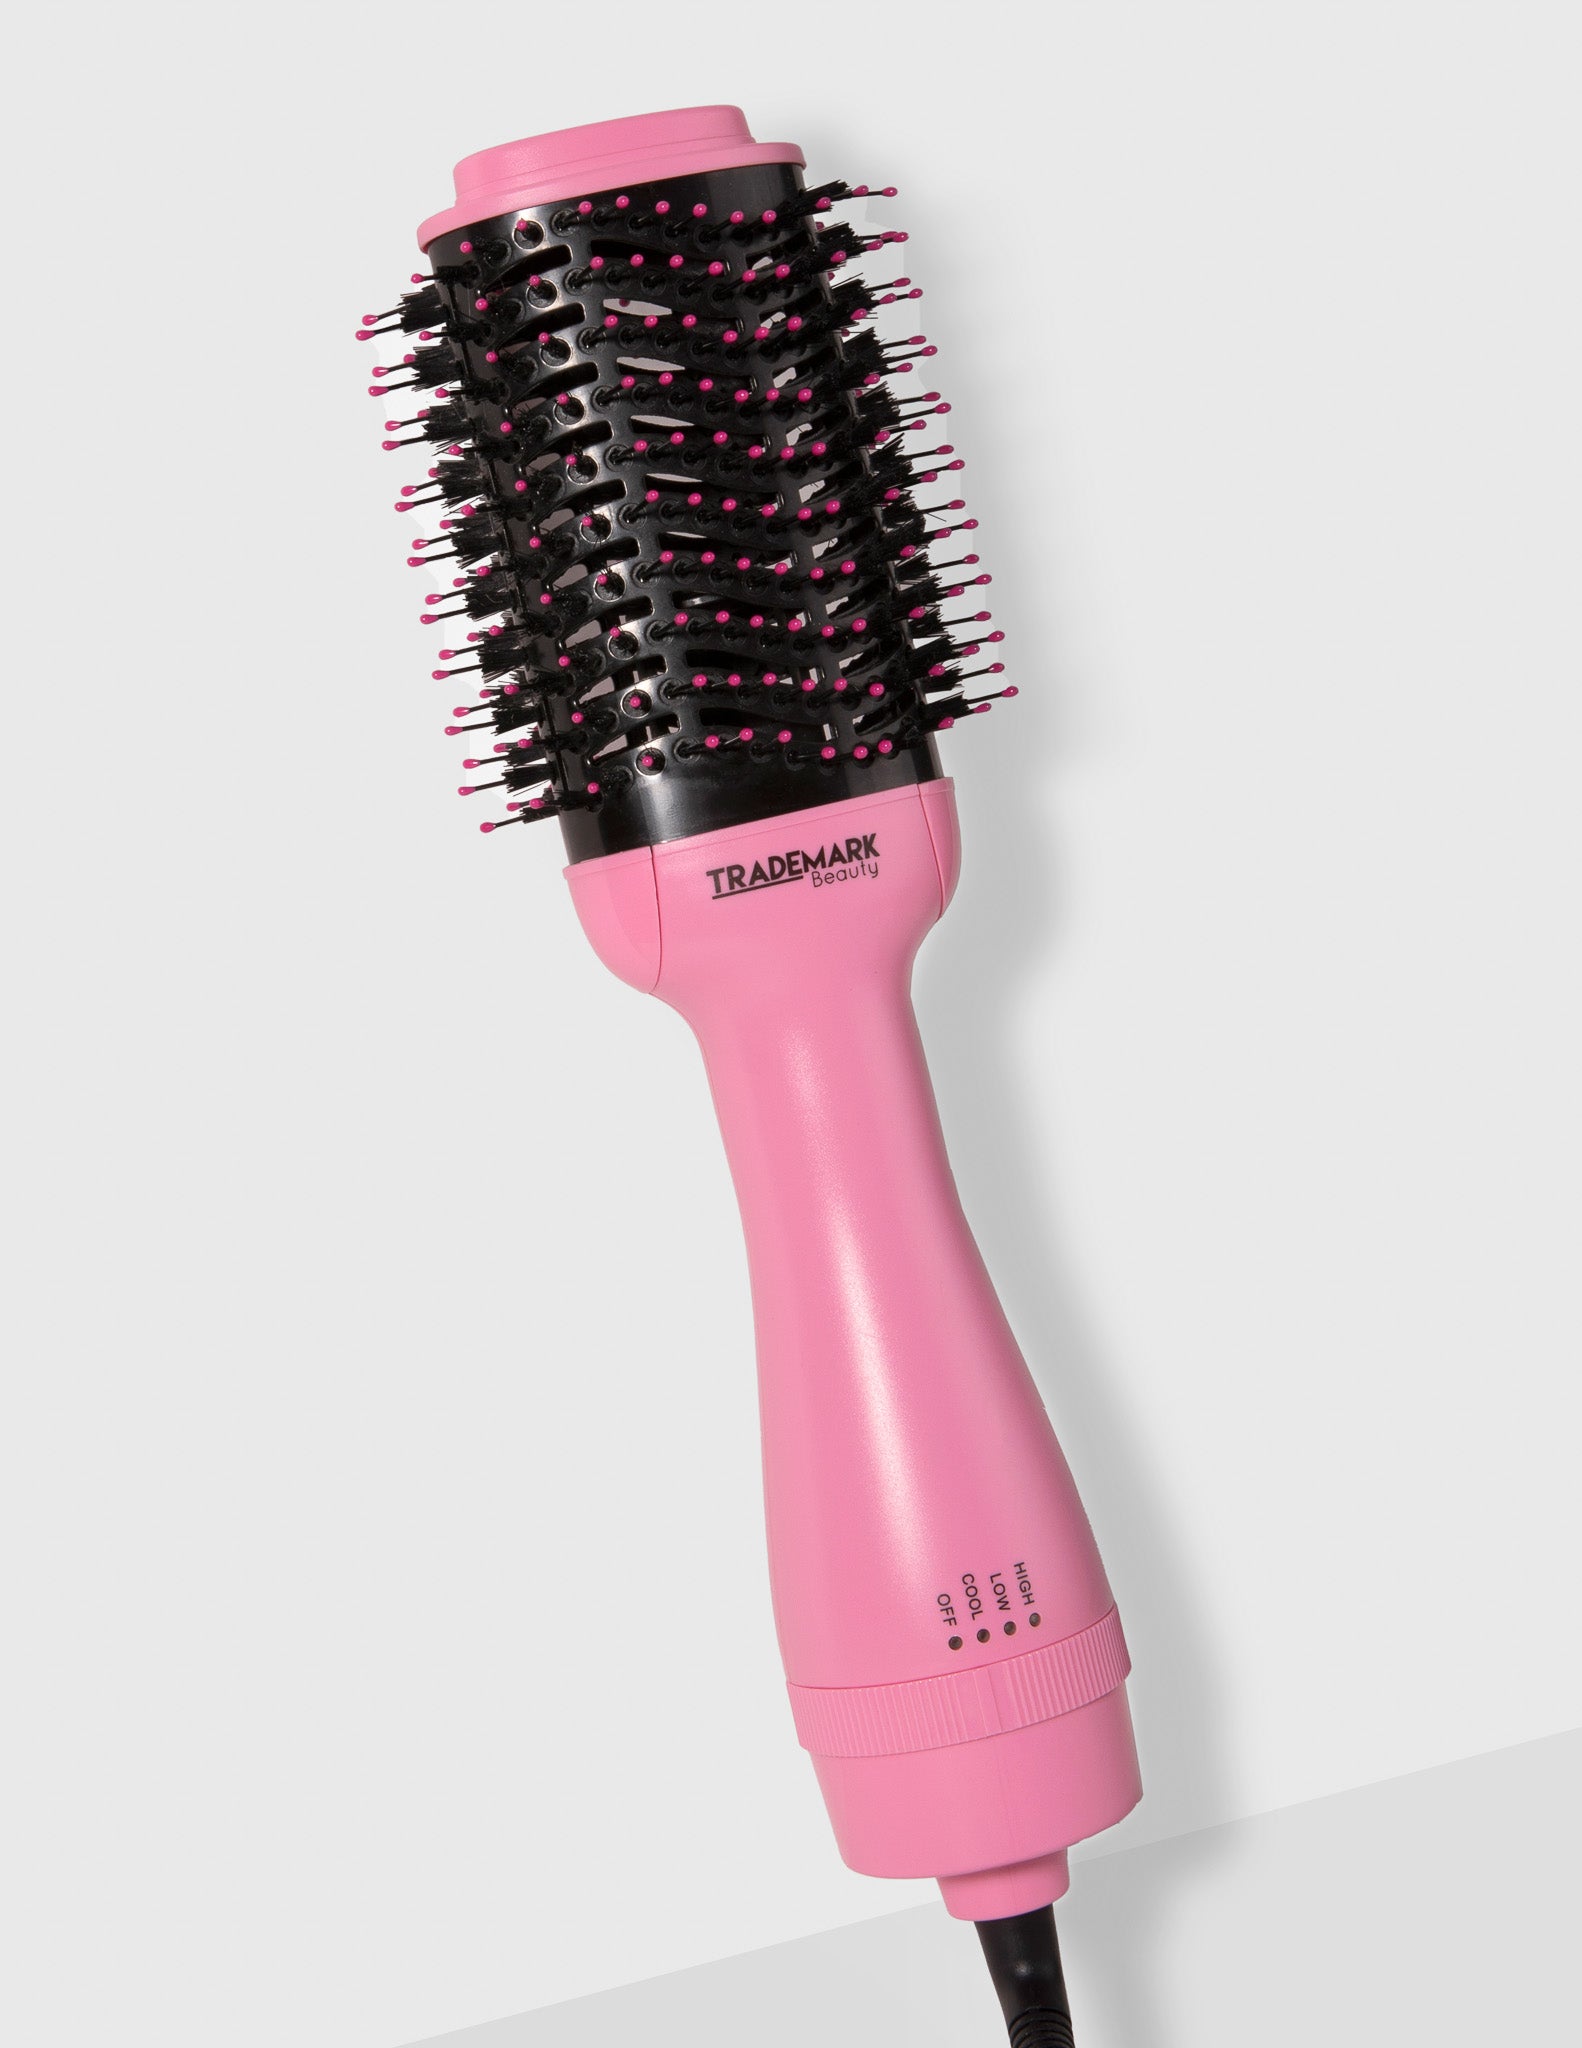 Hot Tools Volumiser Set 2-in-1 Brush and Dryer review